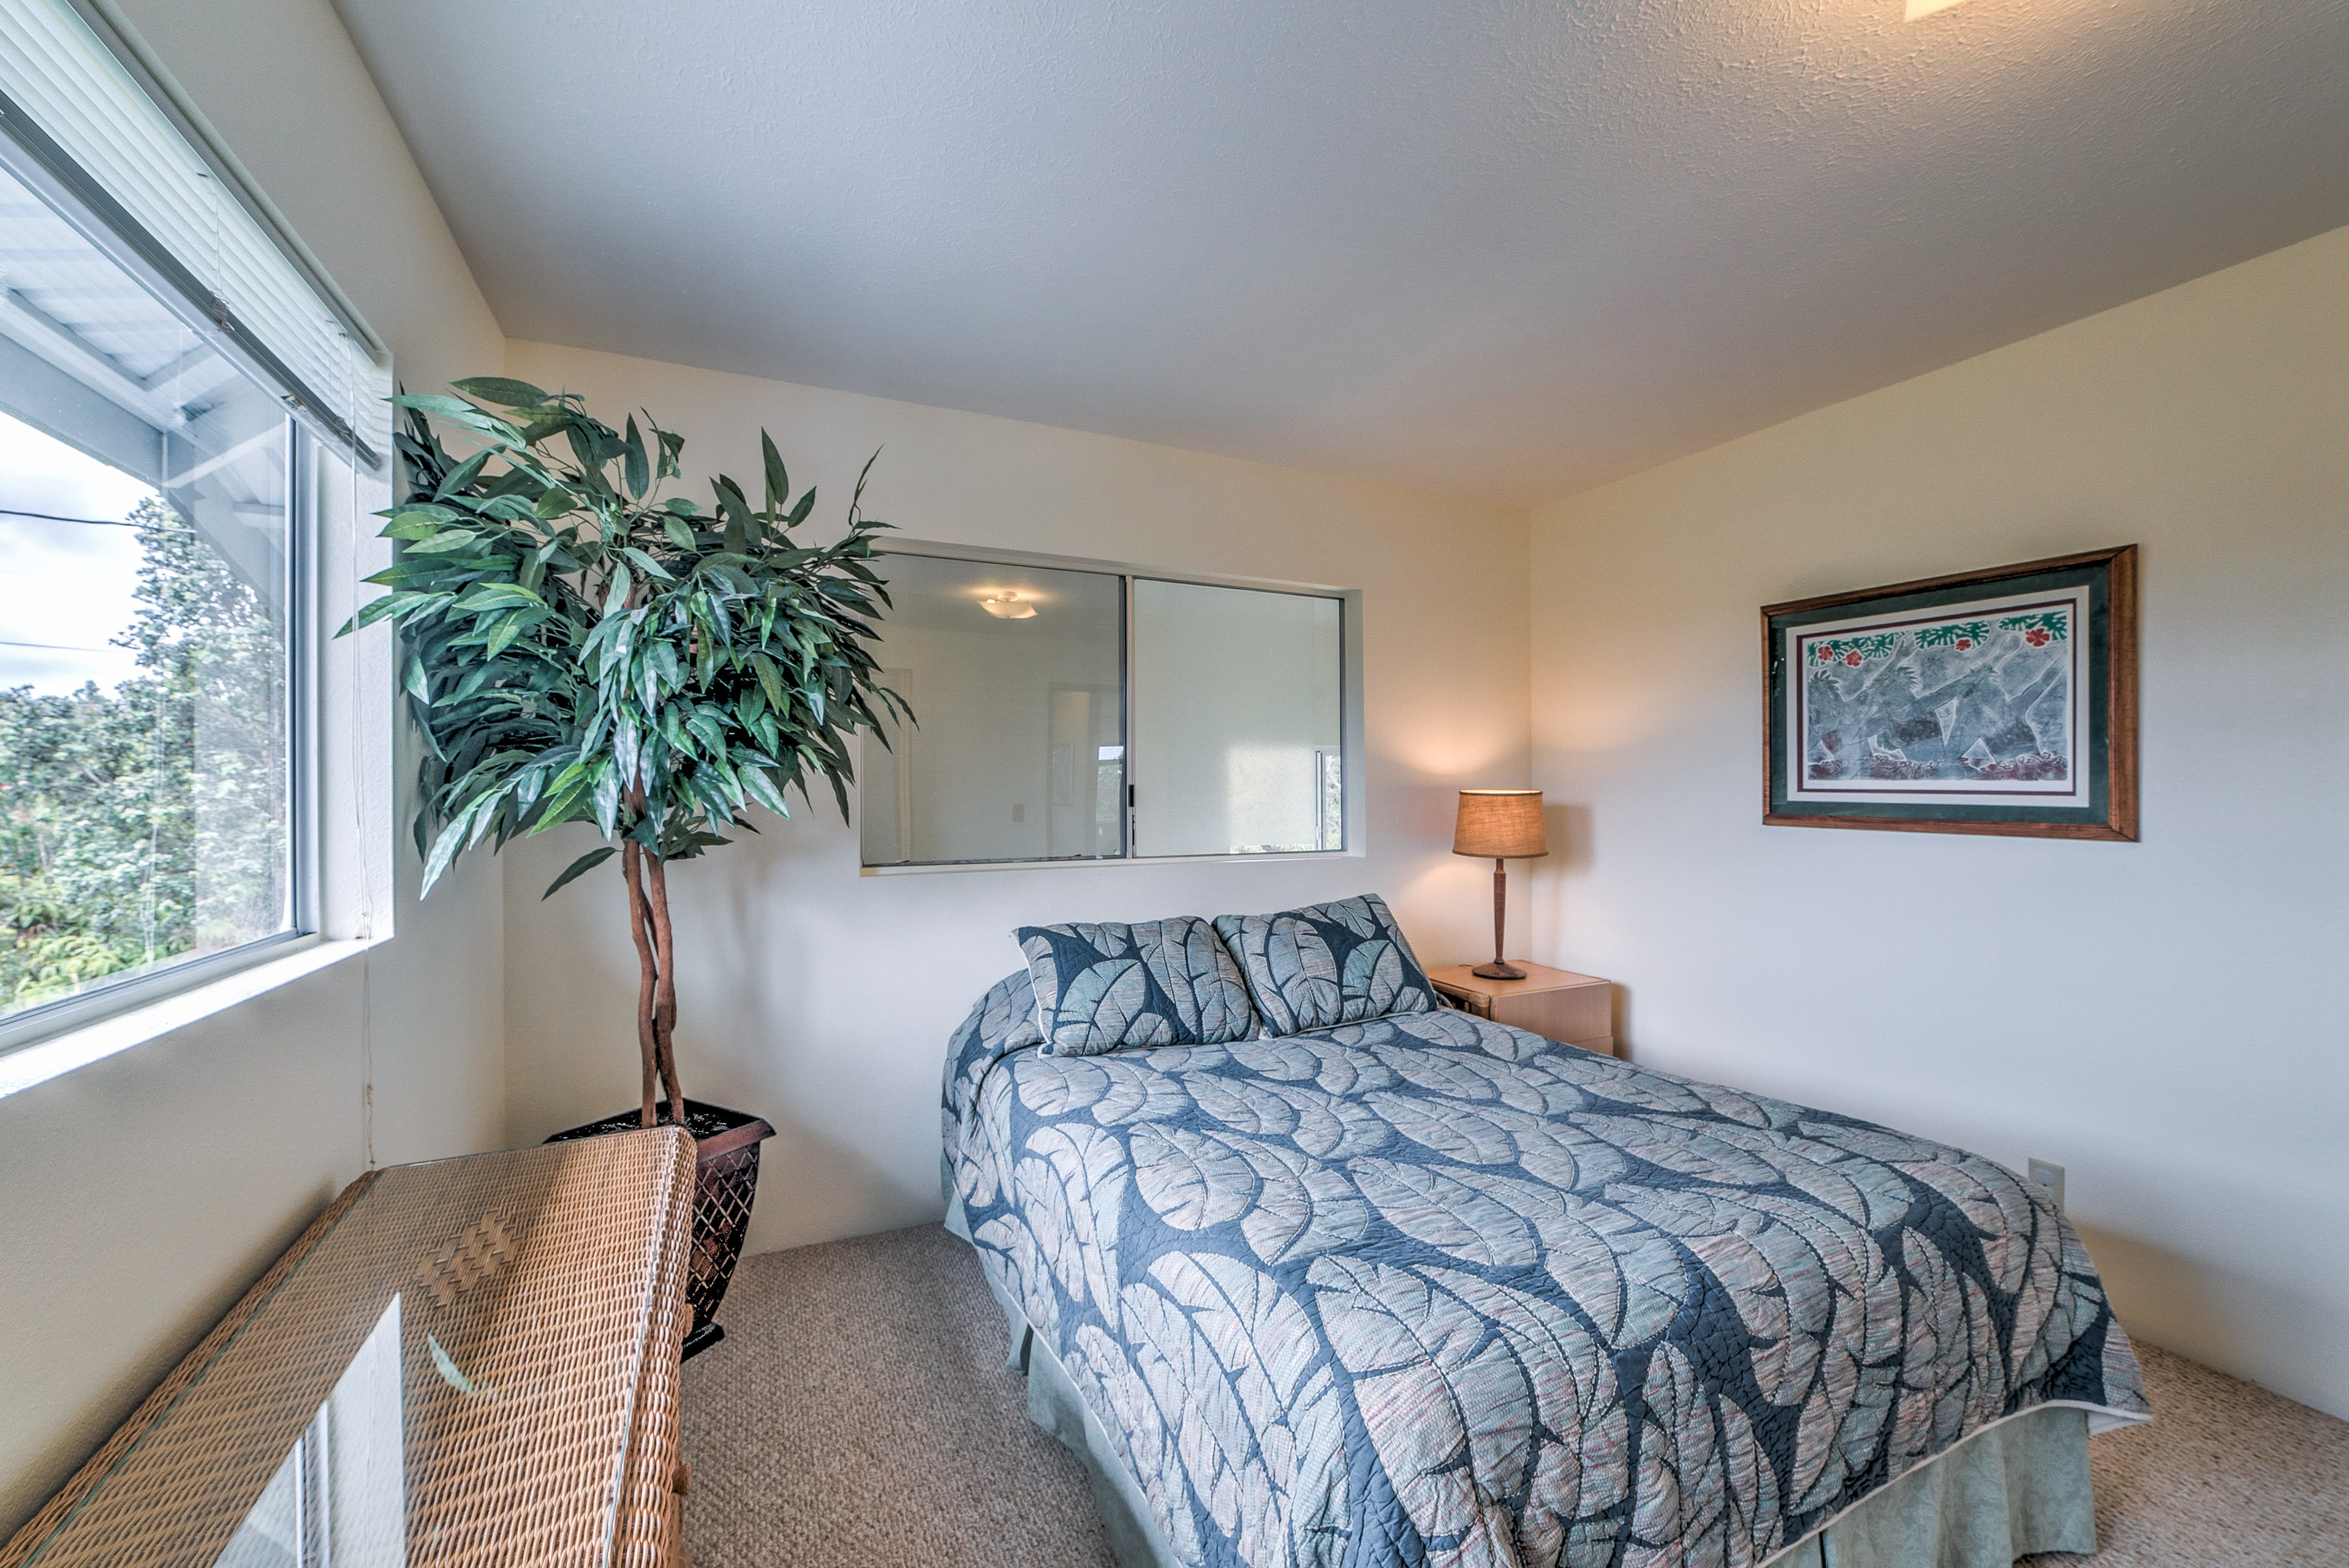 Both the second and third bedroom are furnished with queen beds.